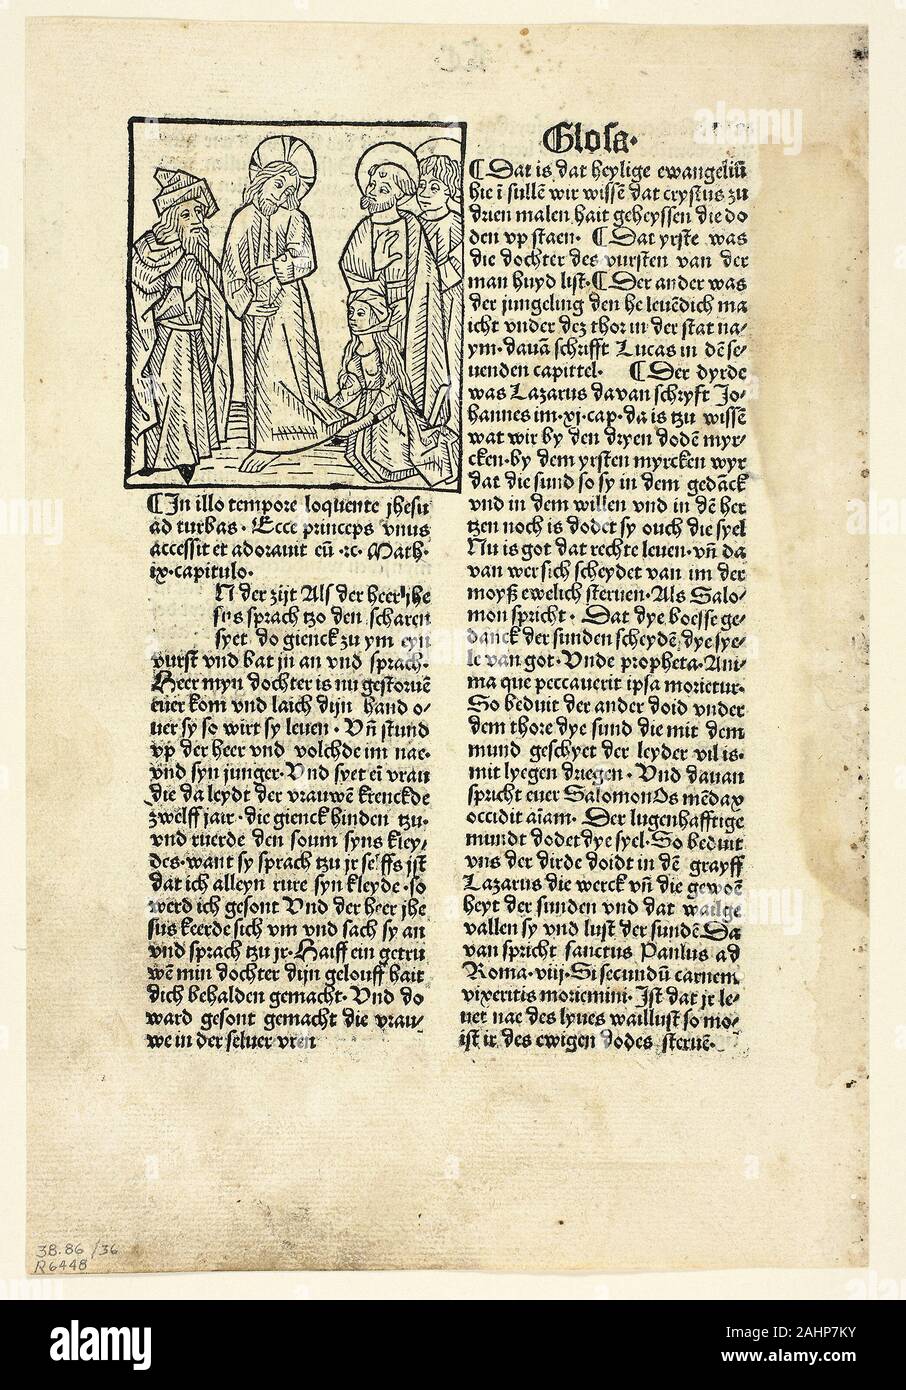 Unknown artist (Illustrator). The Woman Healed of an Issue of Blood from Plenarium (also called Deutsche Evangelien und Episteln, or German Gospels and Epistles), Plate 36 from Woodcuts from Books of the 15th Century. 1489. Germany. Woodcut in black, and letterpress in black (recto and verso), on buff laid paper, tipped onto cream wove paper mat Stock Photo